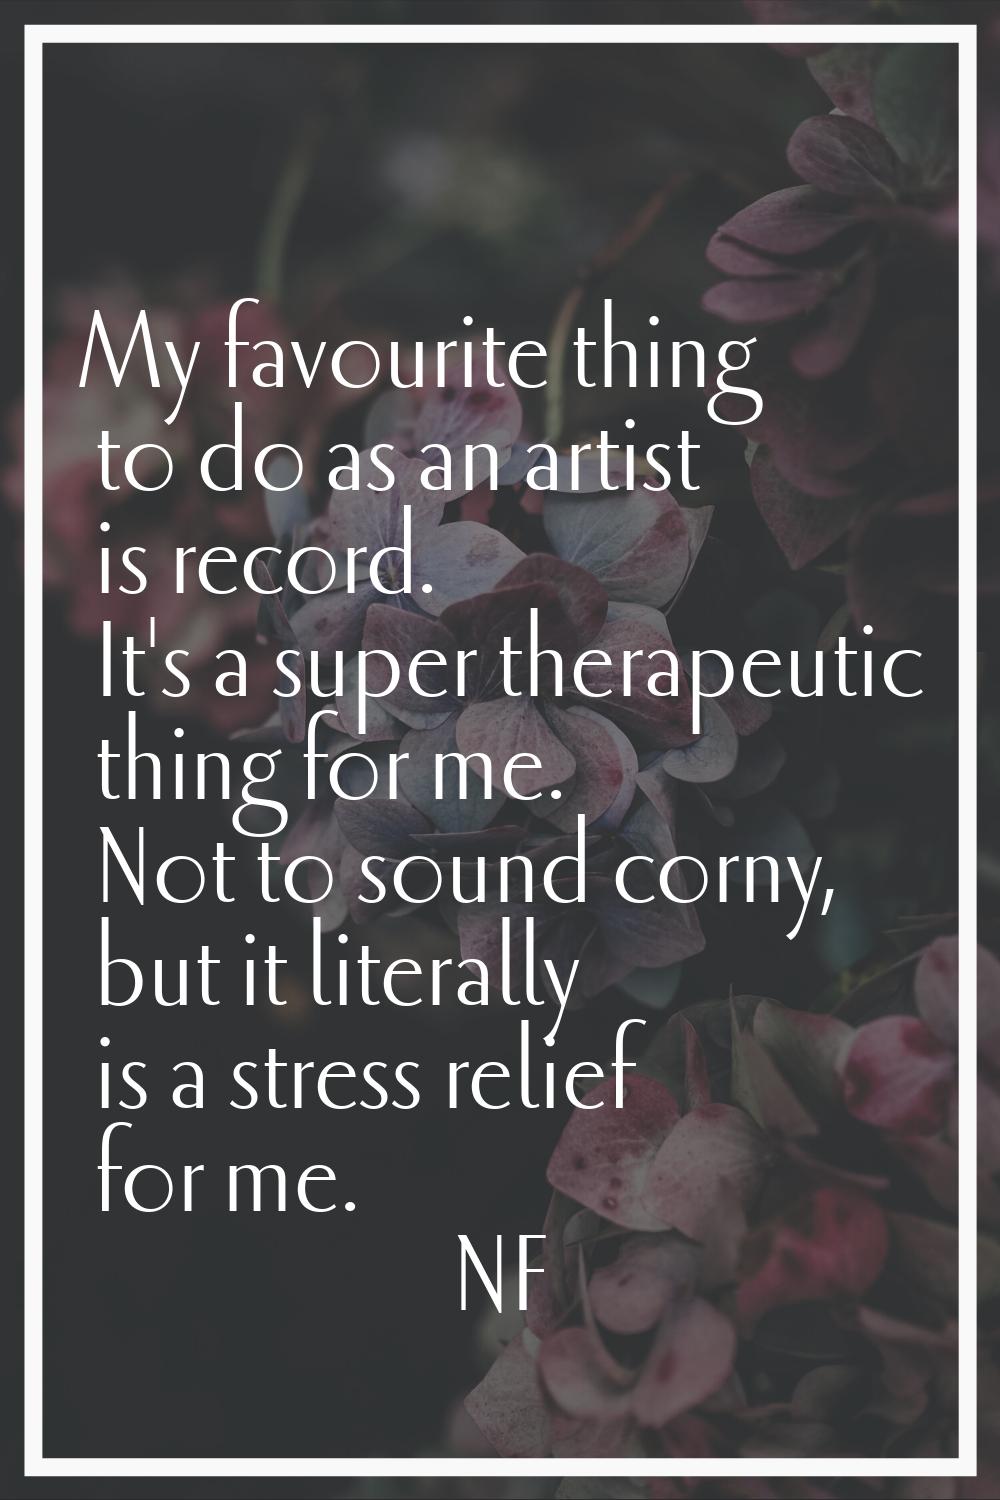 My favourite thing to do as an artist is record. It's a super therapeutic thing for me. Not to soun